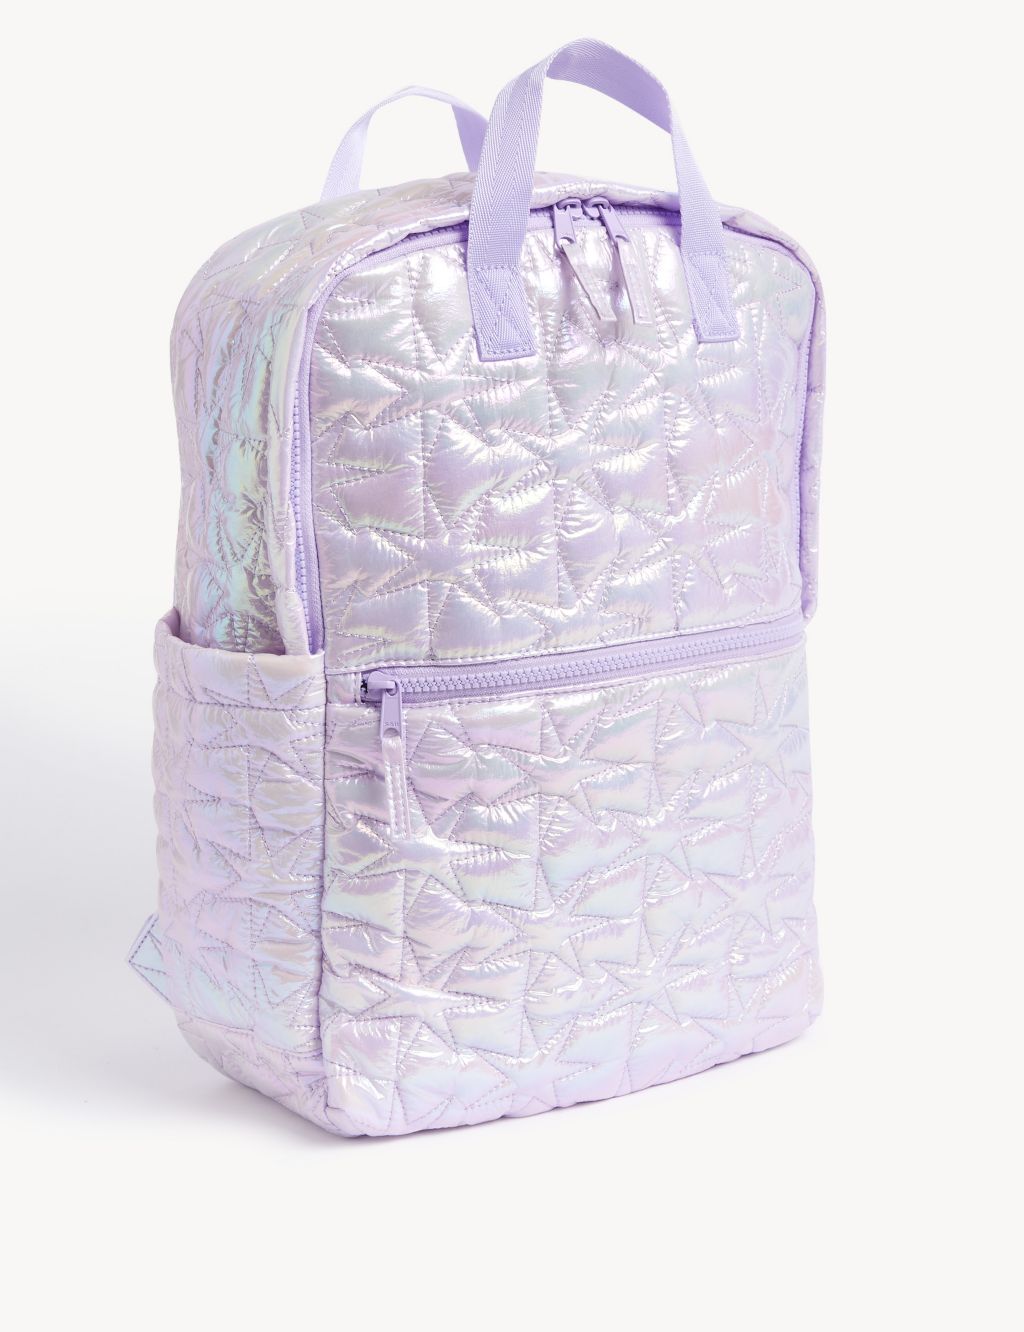 Kids' Shiny Star Quilted School Backpack image 1